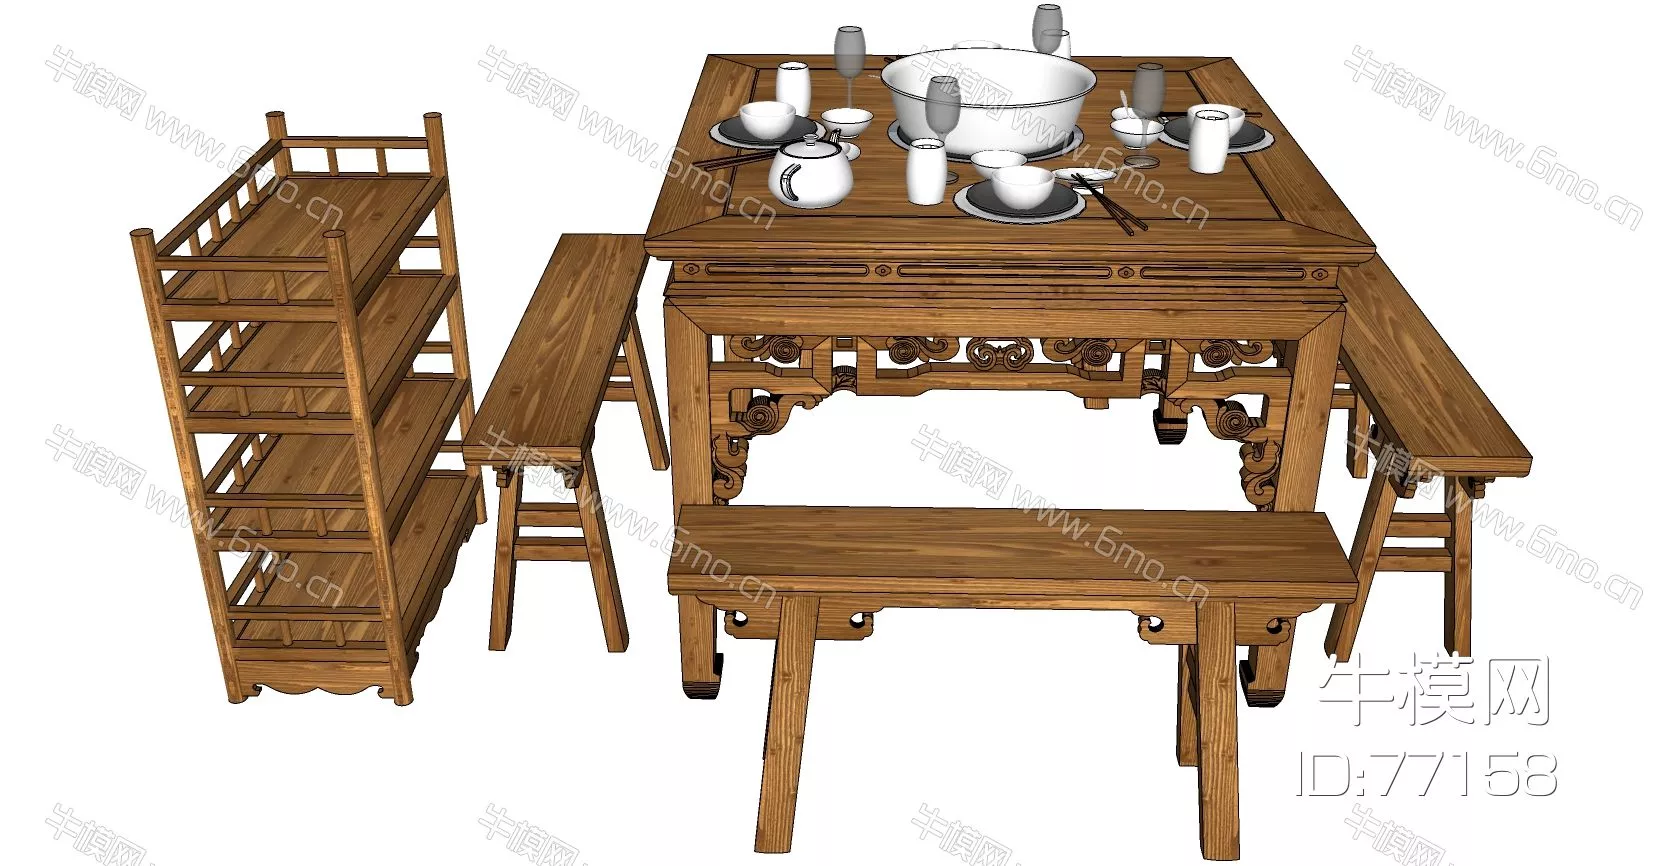 CHINESE DINING TABLE SET - SKETCHUP 3D MODEL - ENSCAPE - 77158